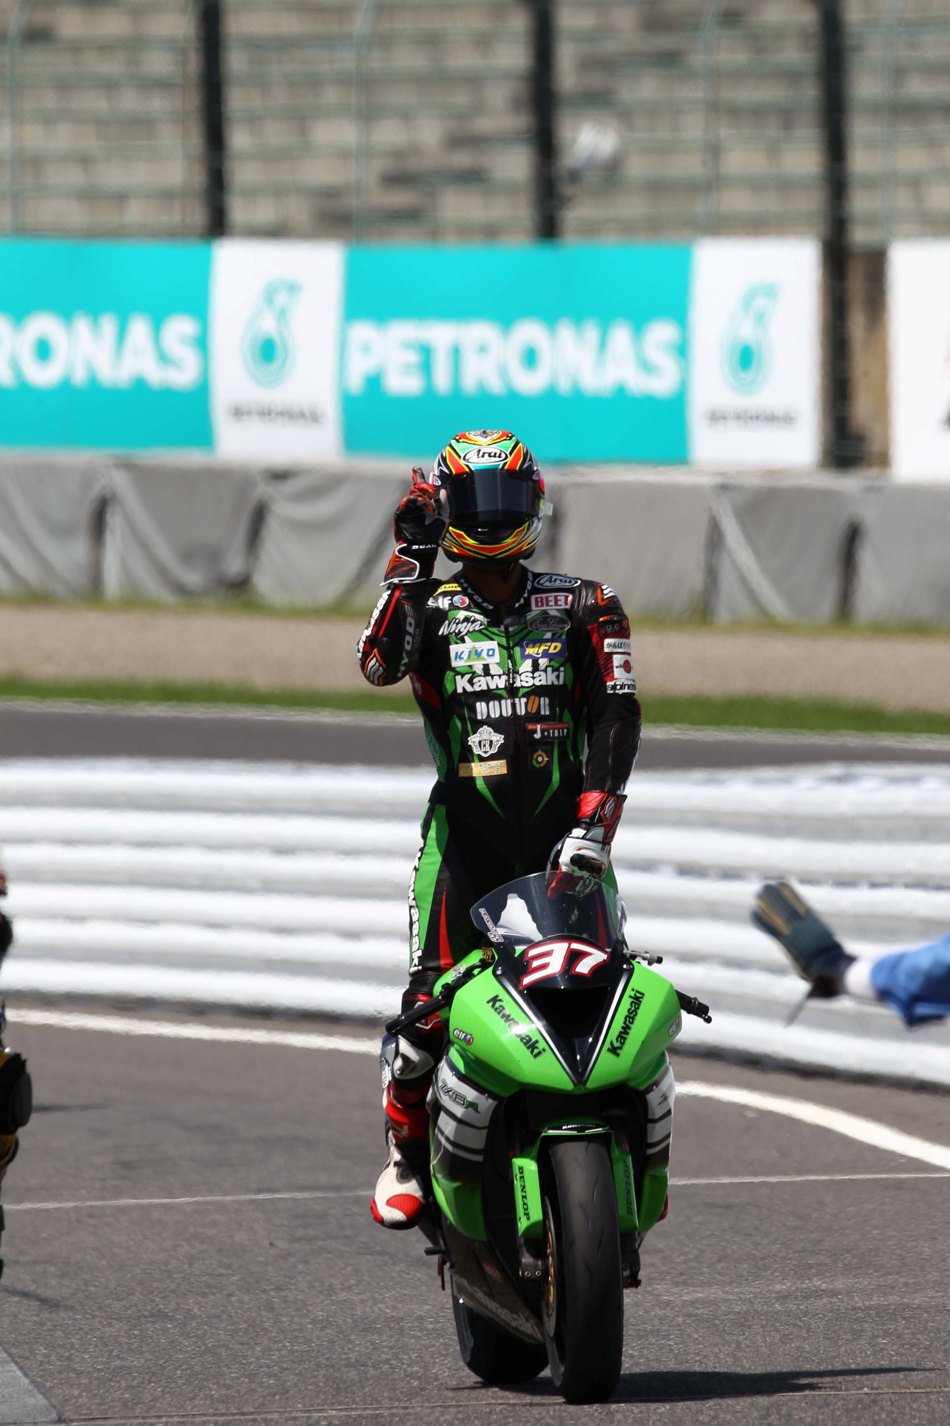 Katsuaki Fujiwara currently leads the SuperSports 600cc overall standings